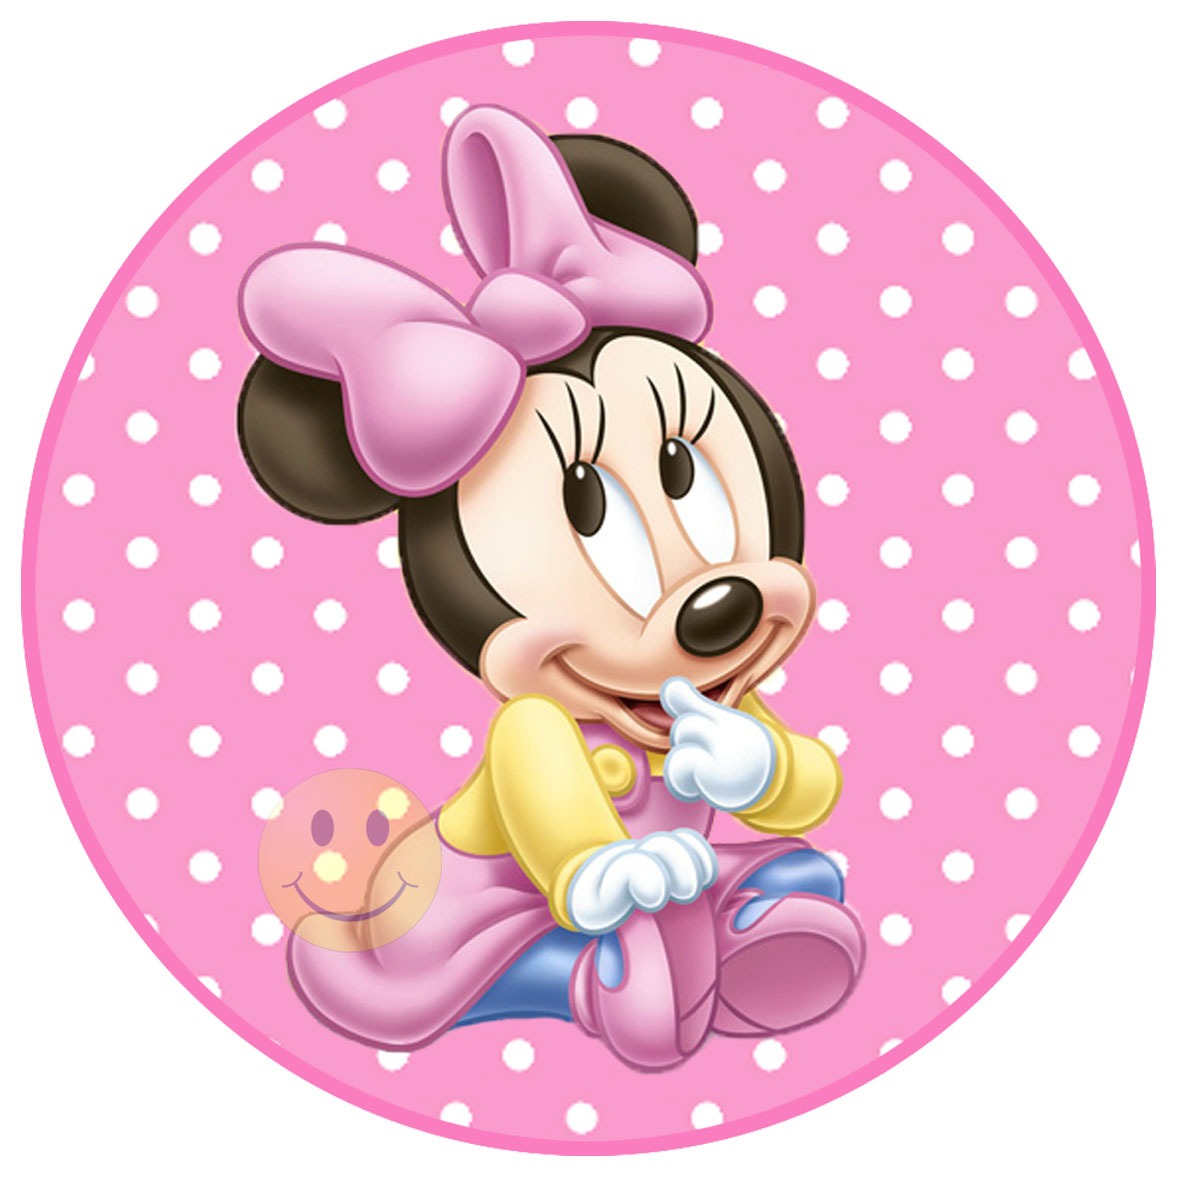 Baby Minnie Mouse Images   Wallpapers High Definition